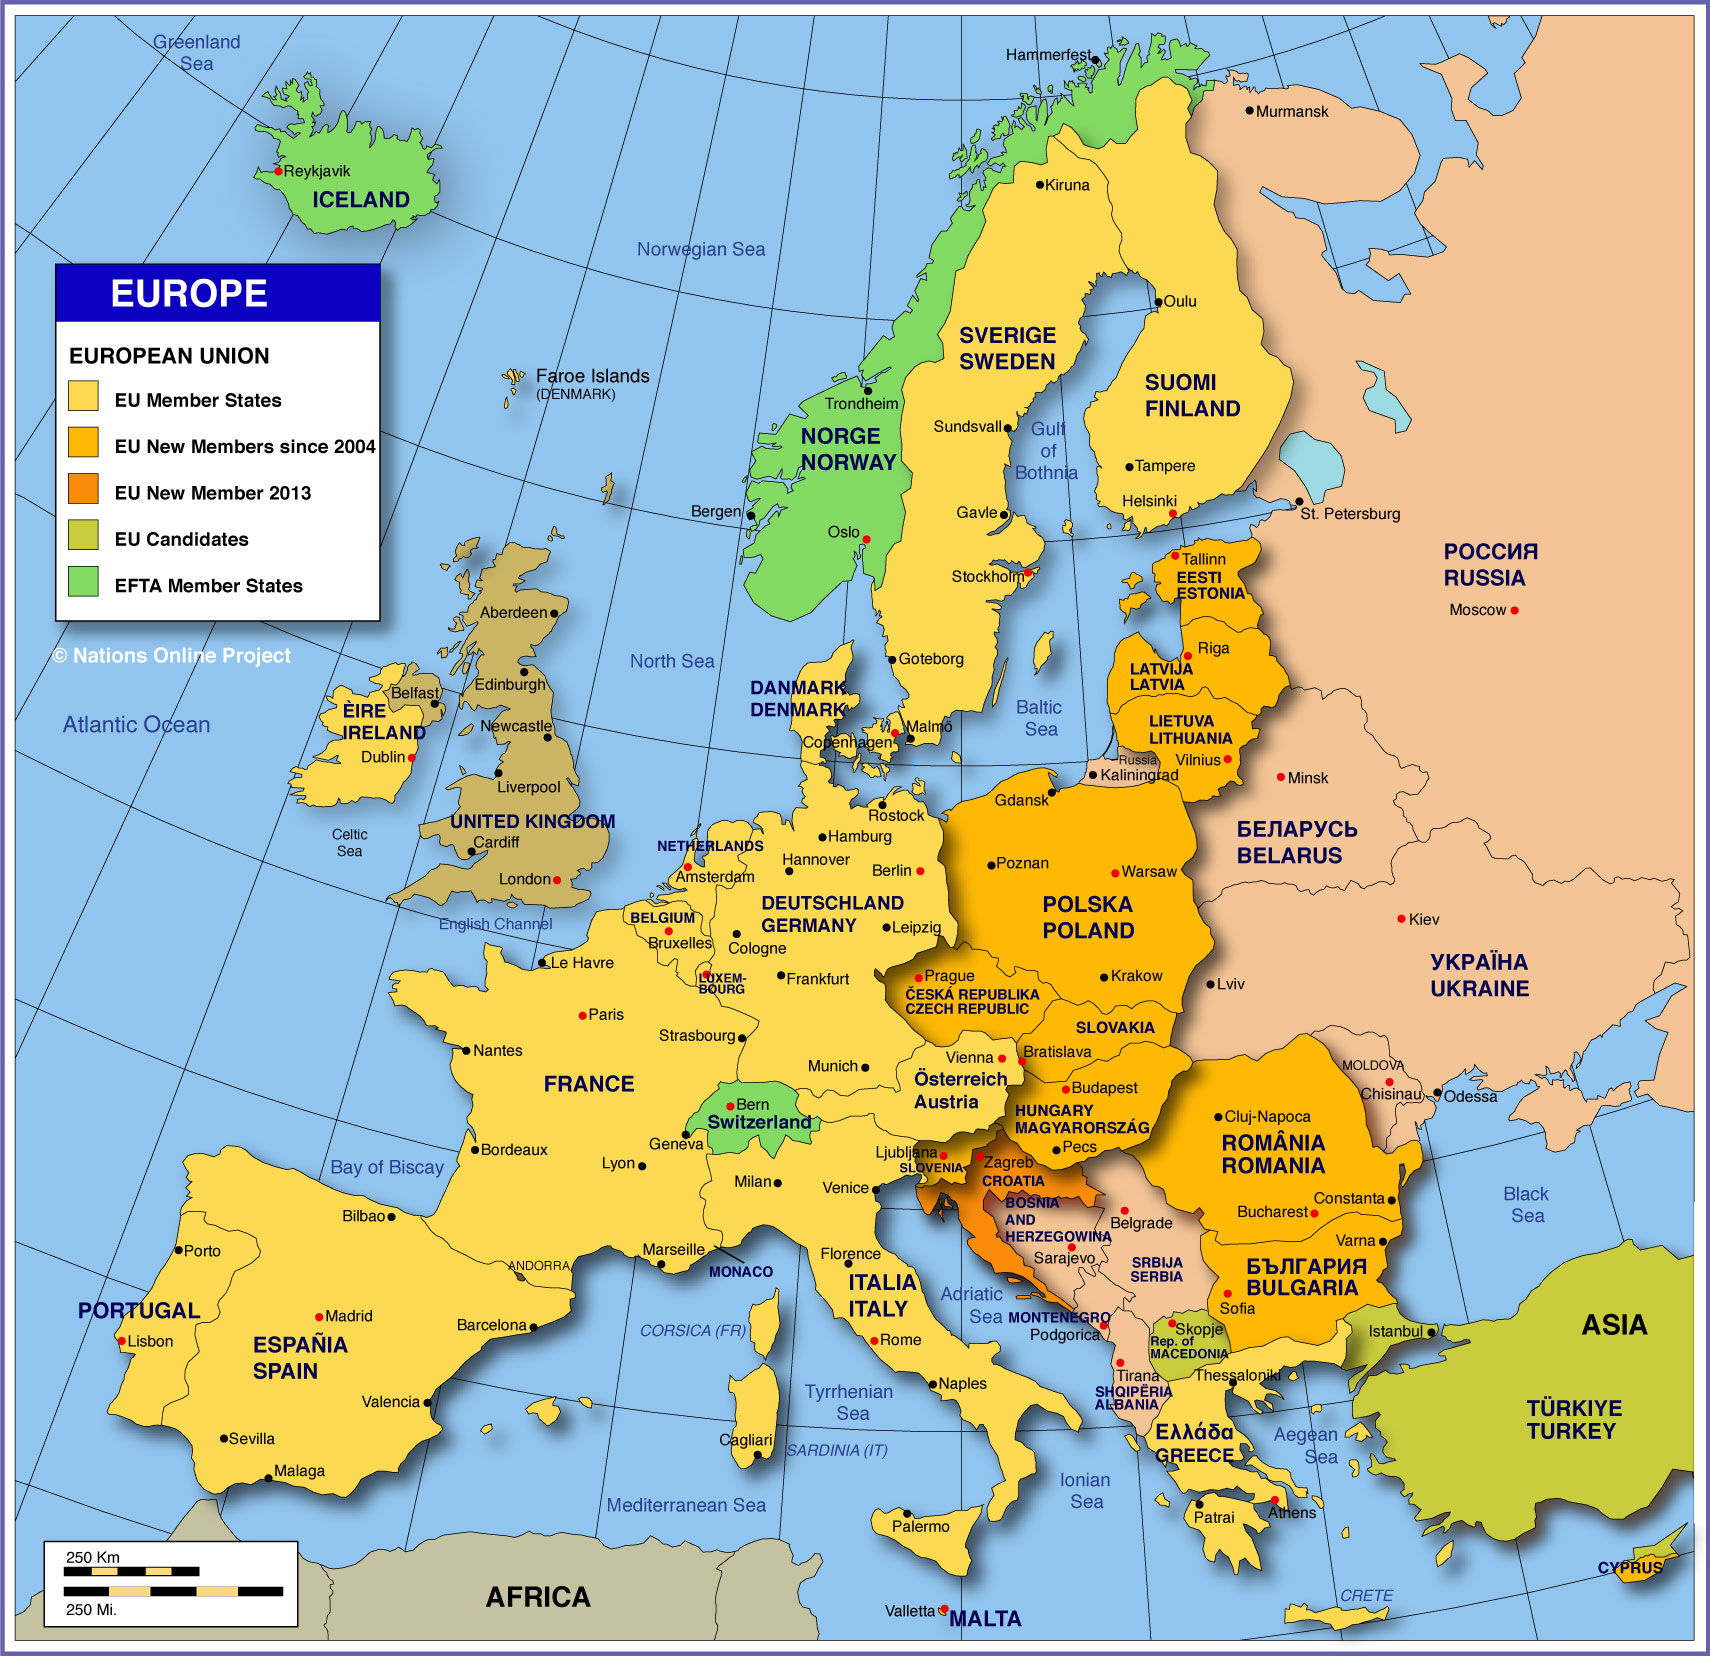 show me map of europe Map Of Europe Member States Of The Eu Nations Online Project show me map of europe